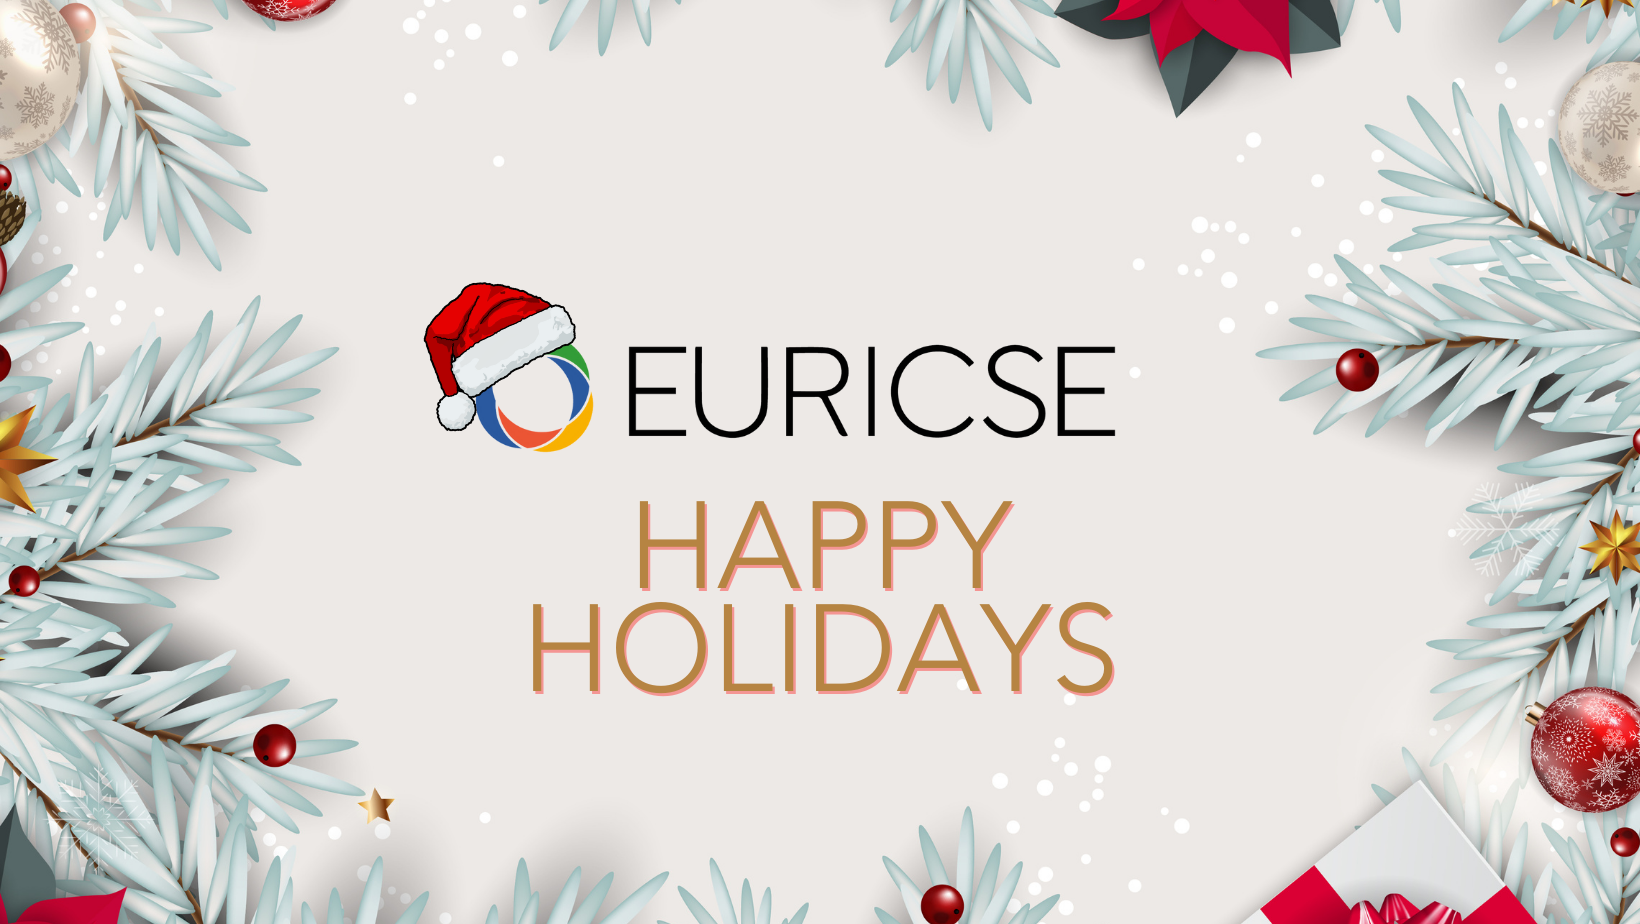 Whishing you happy holidays, from the Euricse Team!